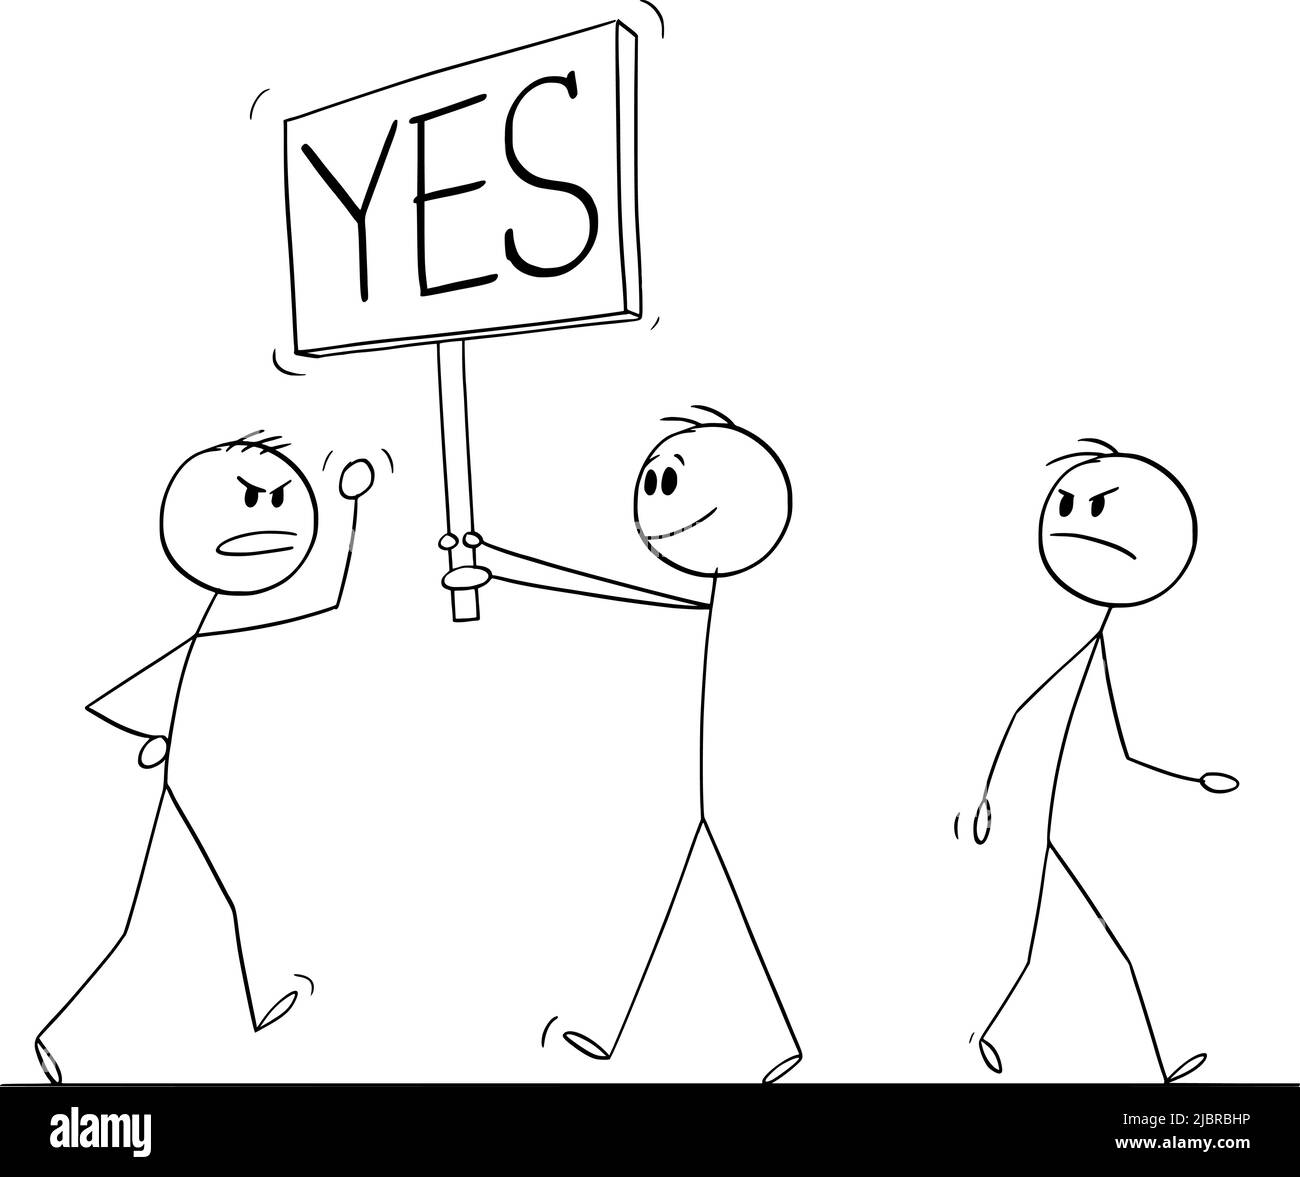 Person Walking on the Street with Yes Sign, Vector Cartoon Stick Figure Illustration Stock Vector